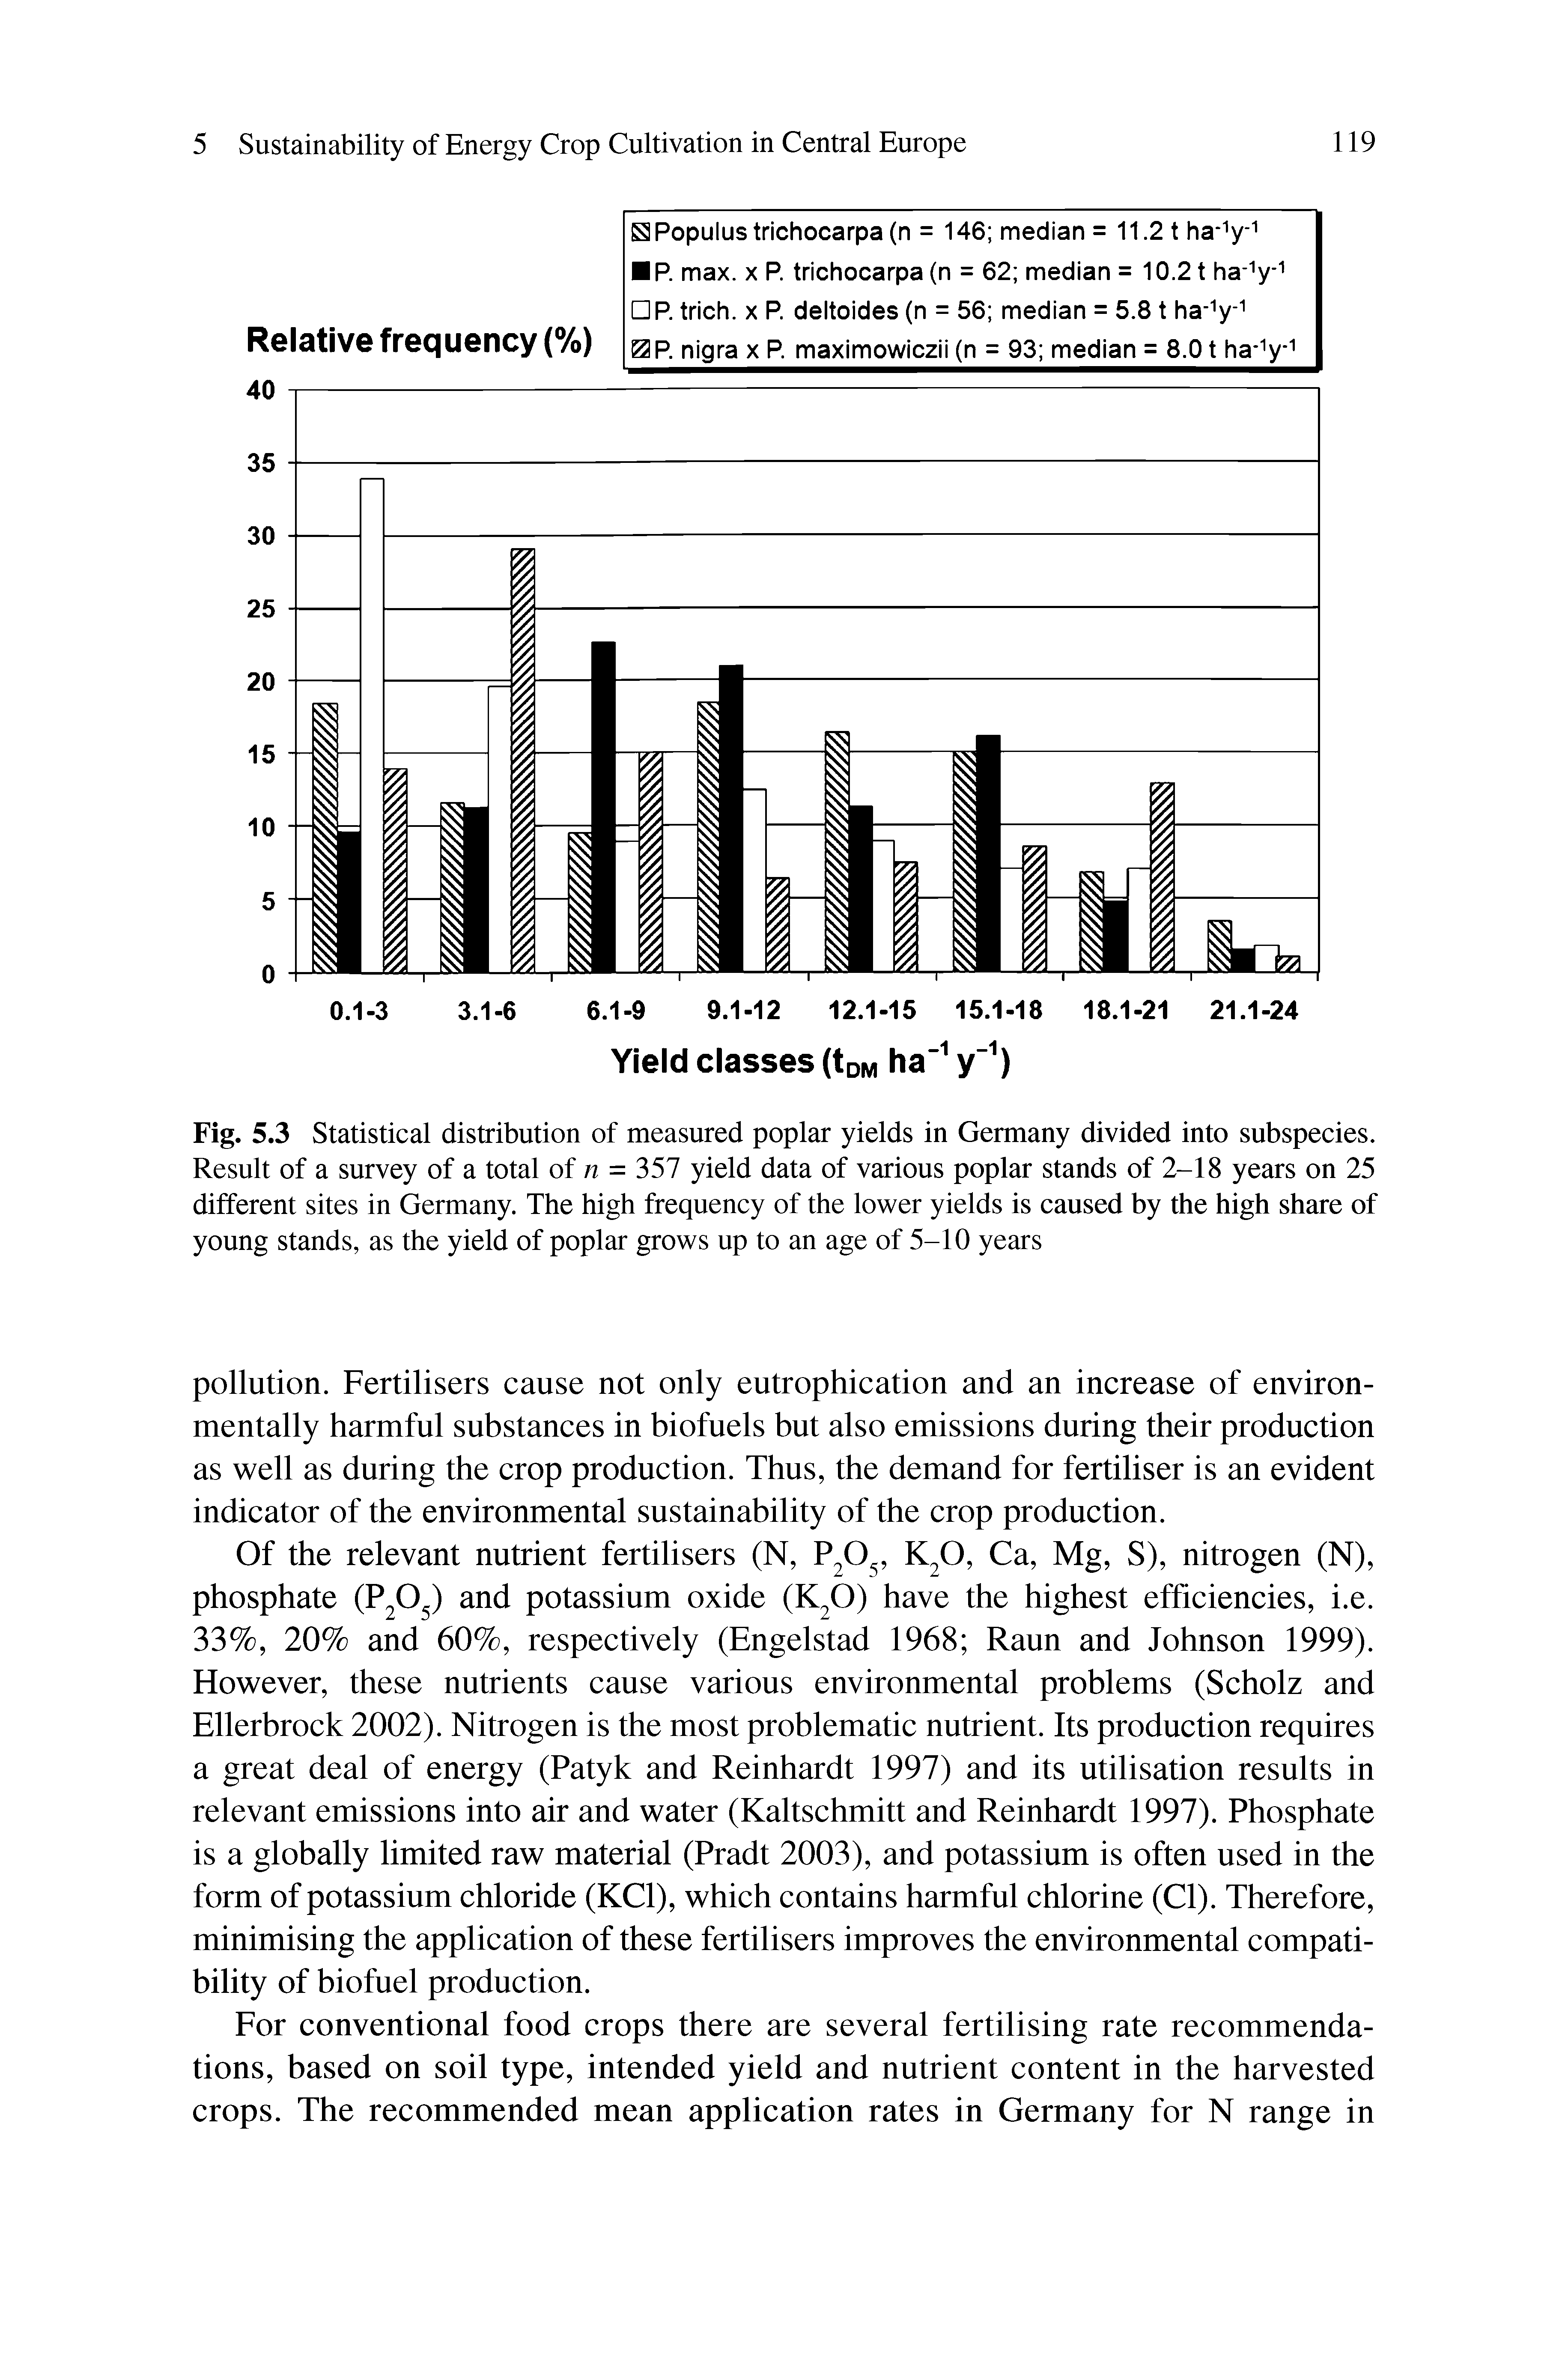 Fig. 5.3 Statistical distribution of measured poplar yields in Germany divided into subspecies. Result of a survey of a total of n = 357 yield data of various poplar stands of 2-18 years on 25 different sites in Germany. The high frequency of the lower yields is caused by the high share of young stands, as the yield of poplar grows up to an age of 5-10 years...